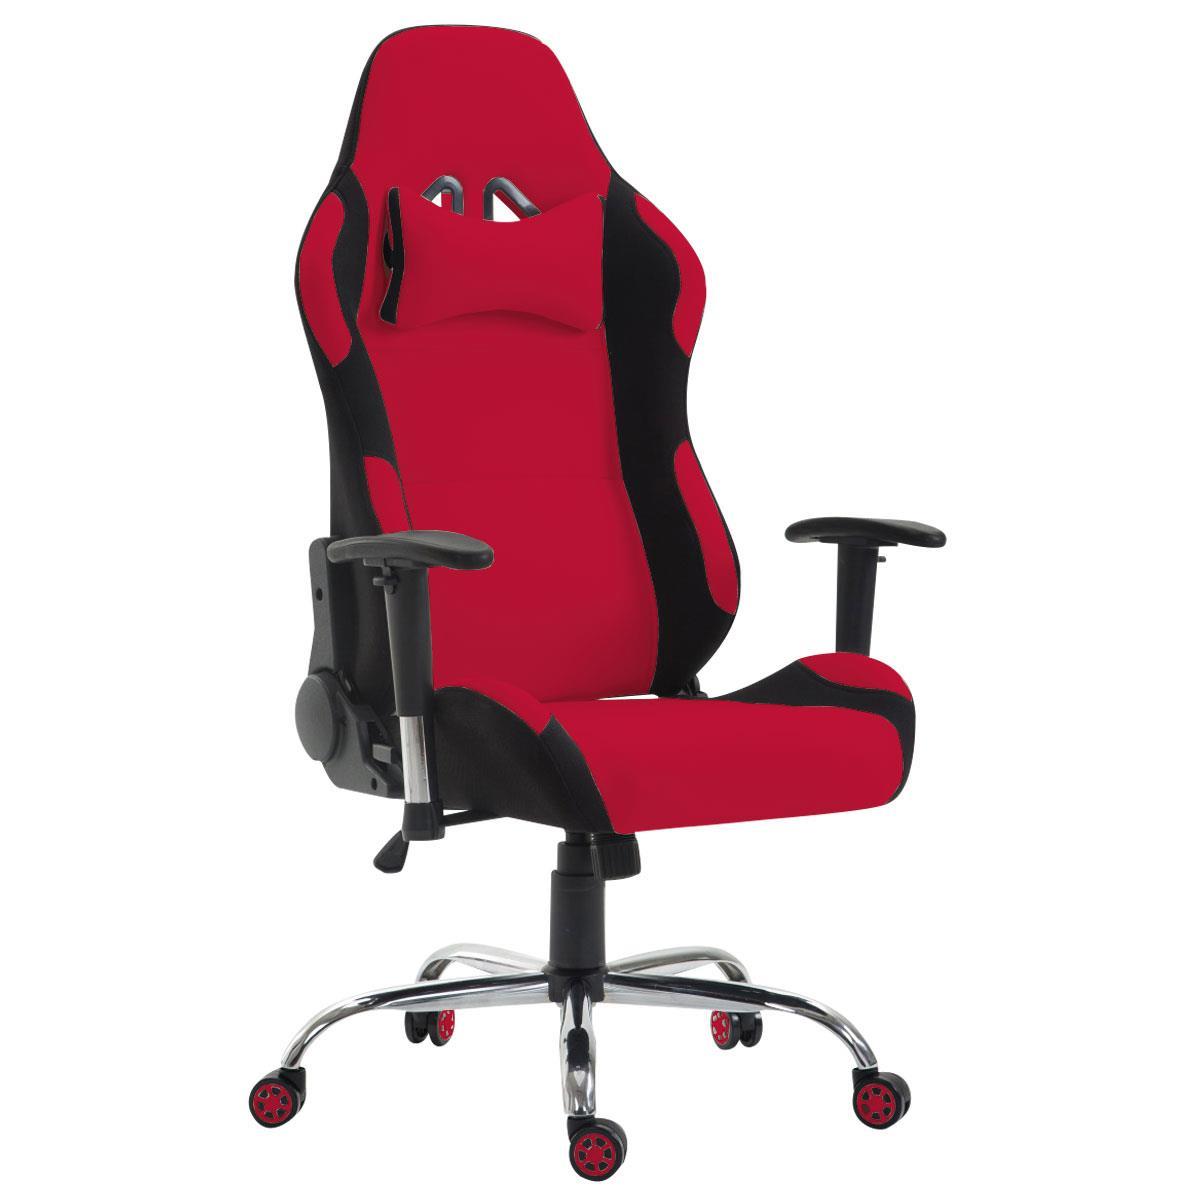 Fauteuil Gamer ROBY TISSU, Design Sportif et Grand Confort, Rouge